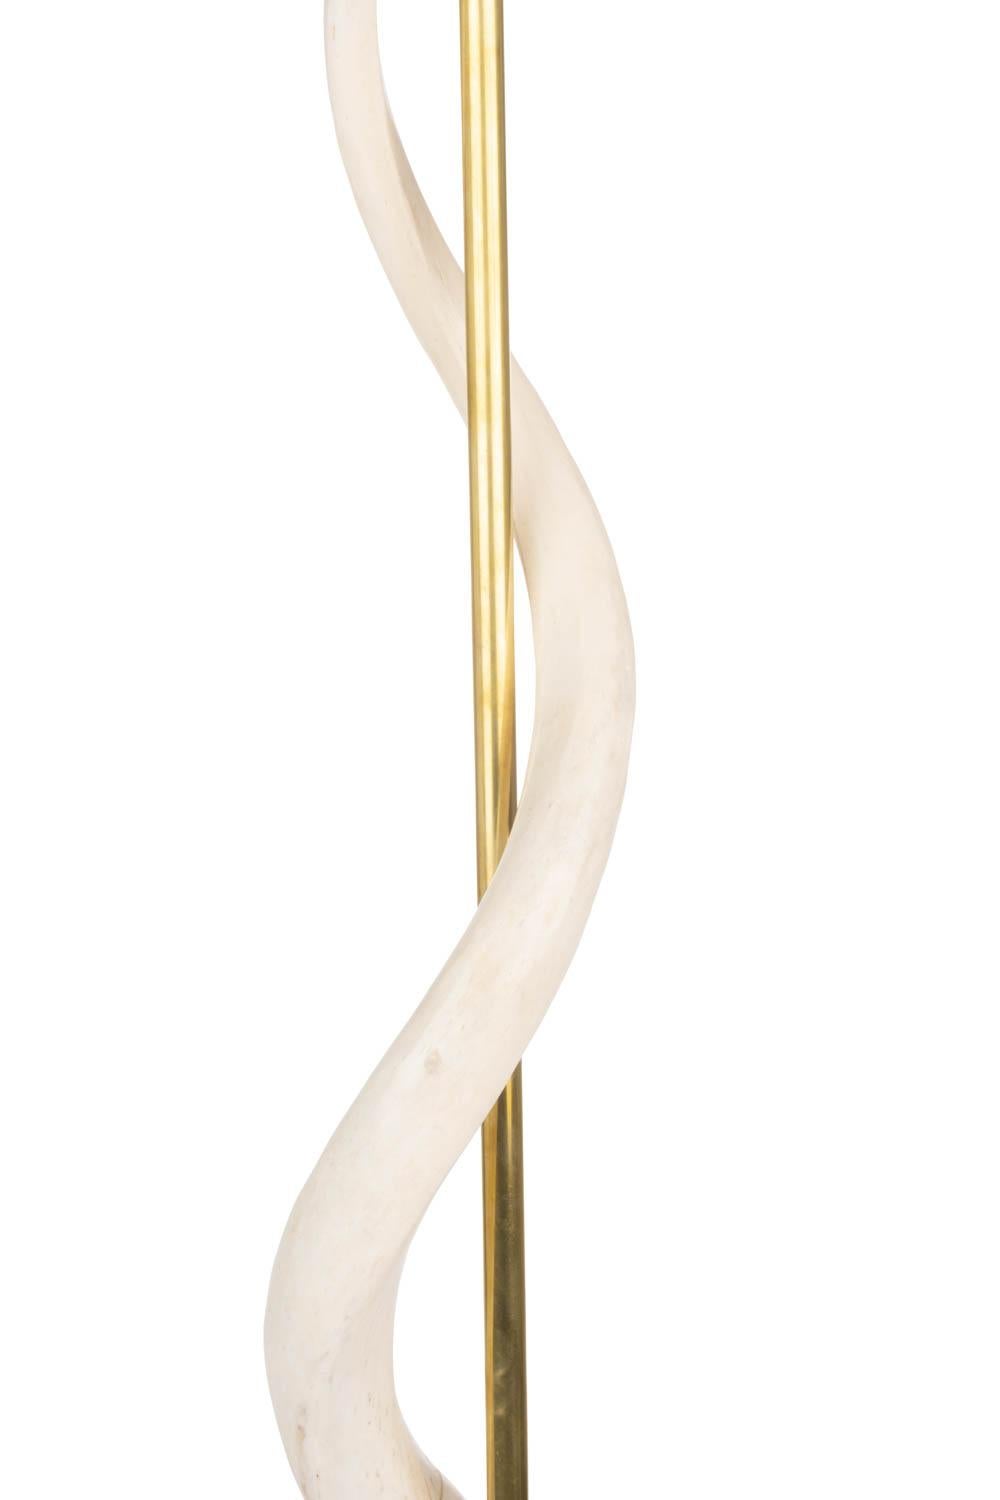 Handcrafted in South Africa, this naturally elegant floor lamp features two inverse African kudu horns encirling a brass rod above a round wooden base, which is wrapped in top-stitched devore cream cow hide with metallic gold accents. All hide and